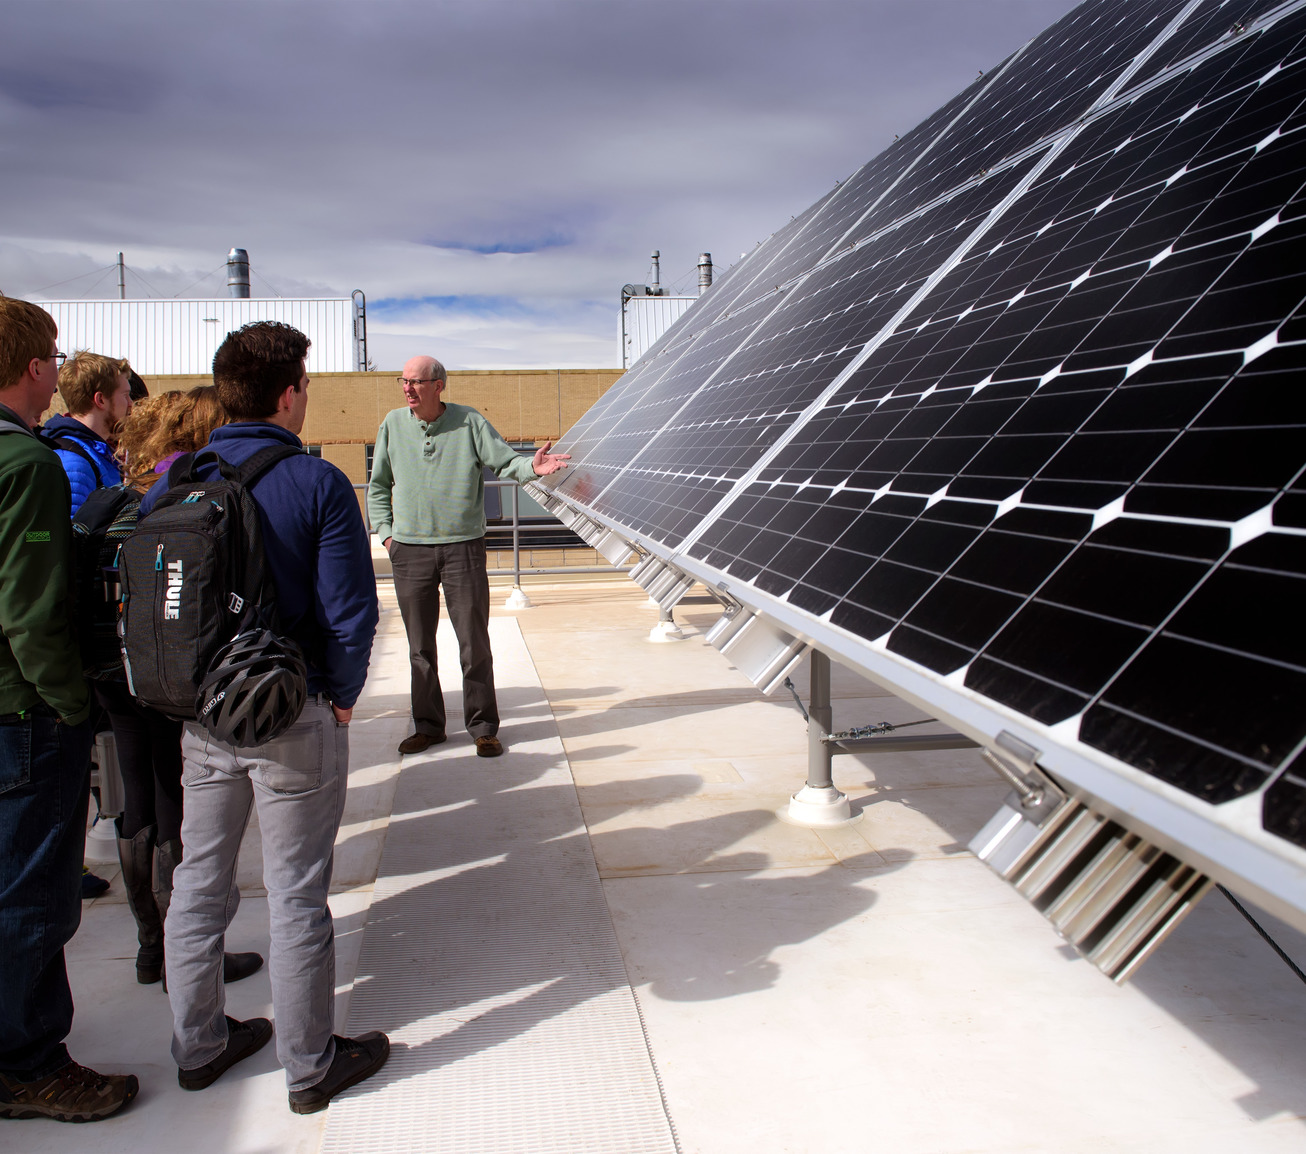 Students and professor looking at solar panels